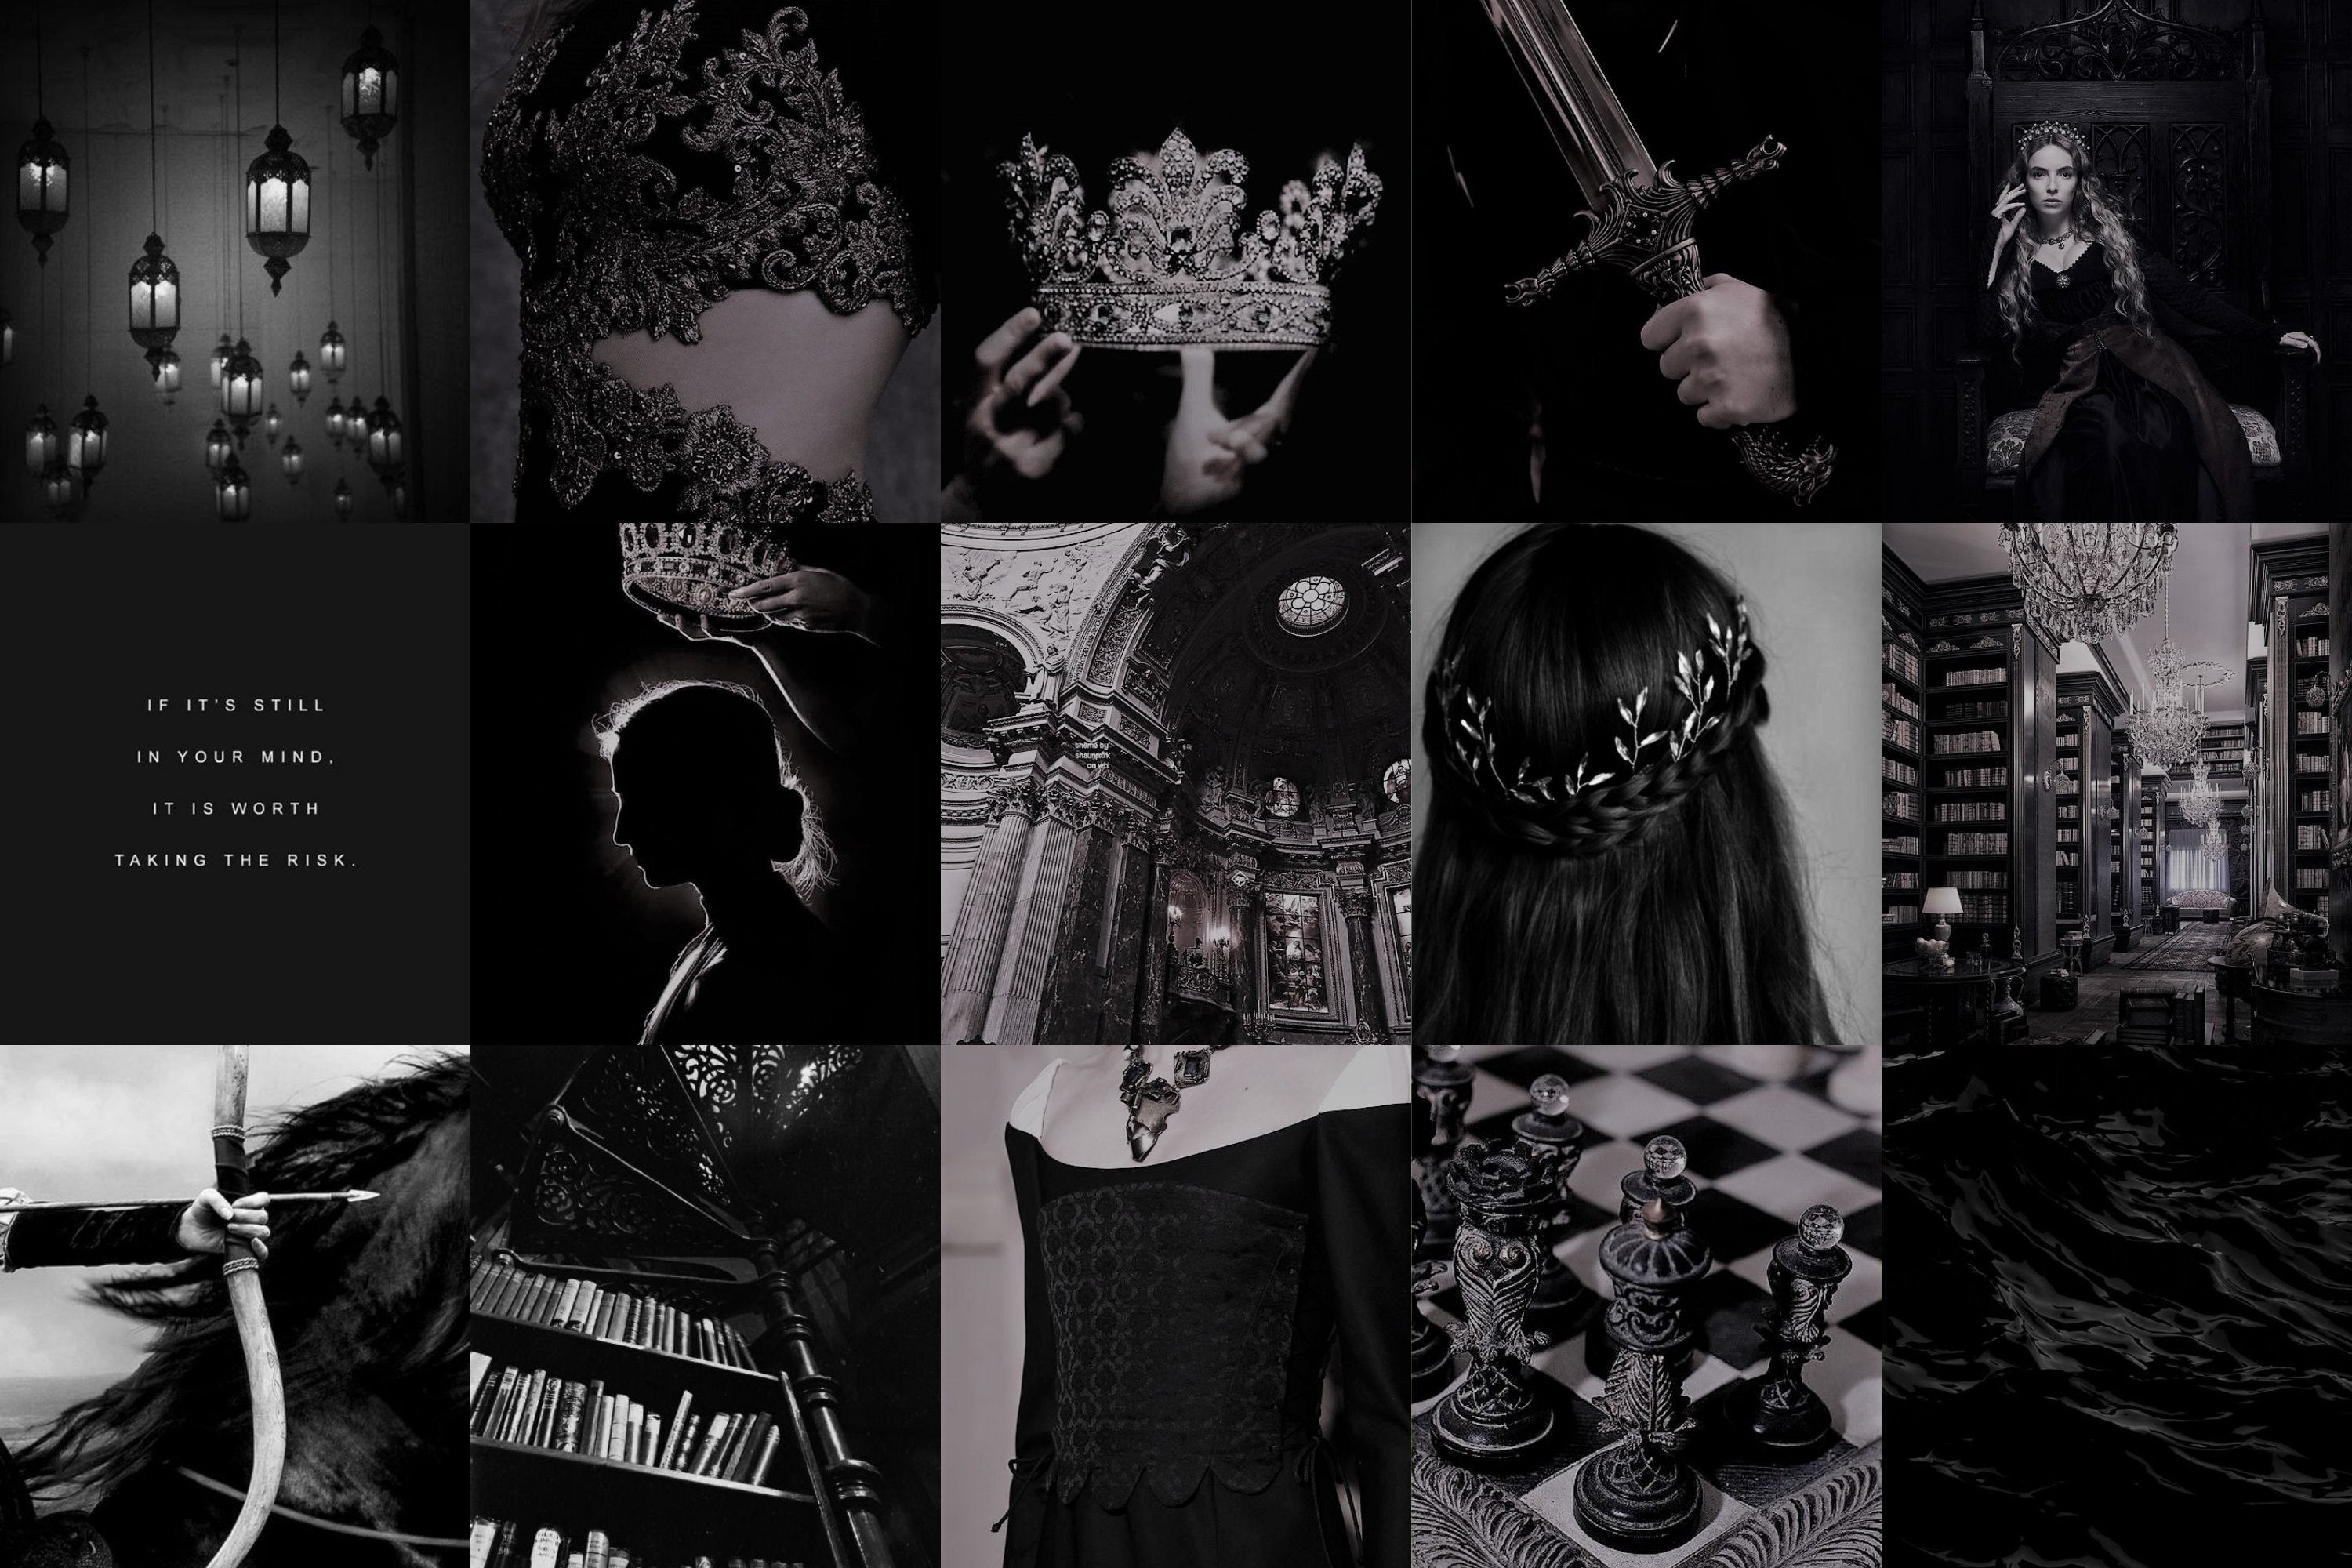 A collage of black and white images with different themes - Royalcore